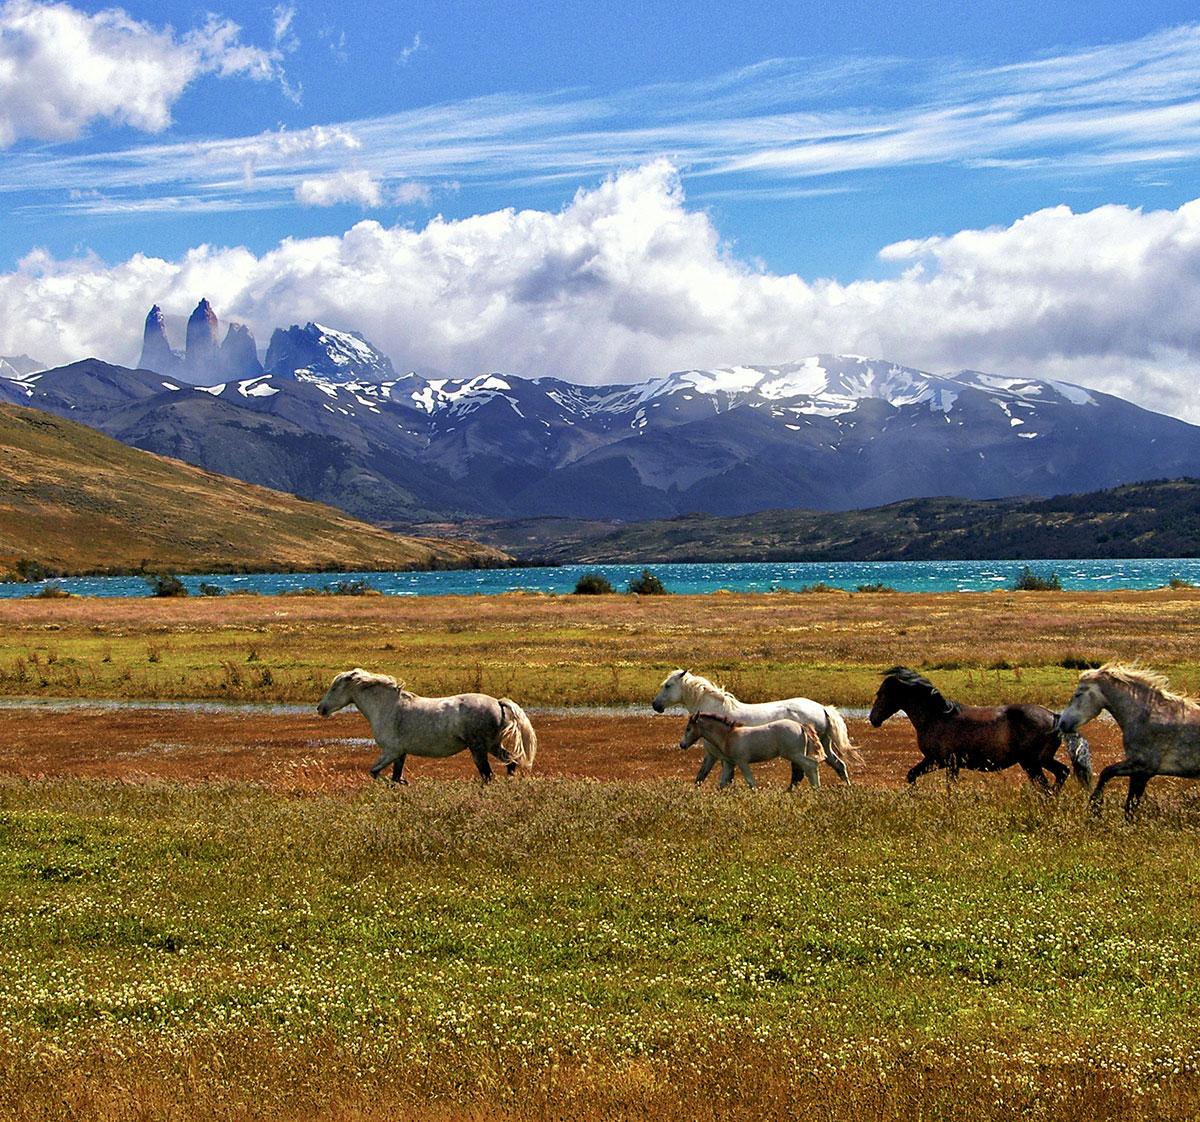 A team of horses gallops through the Chilean landscape below the Andes Mountain range.